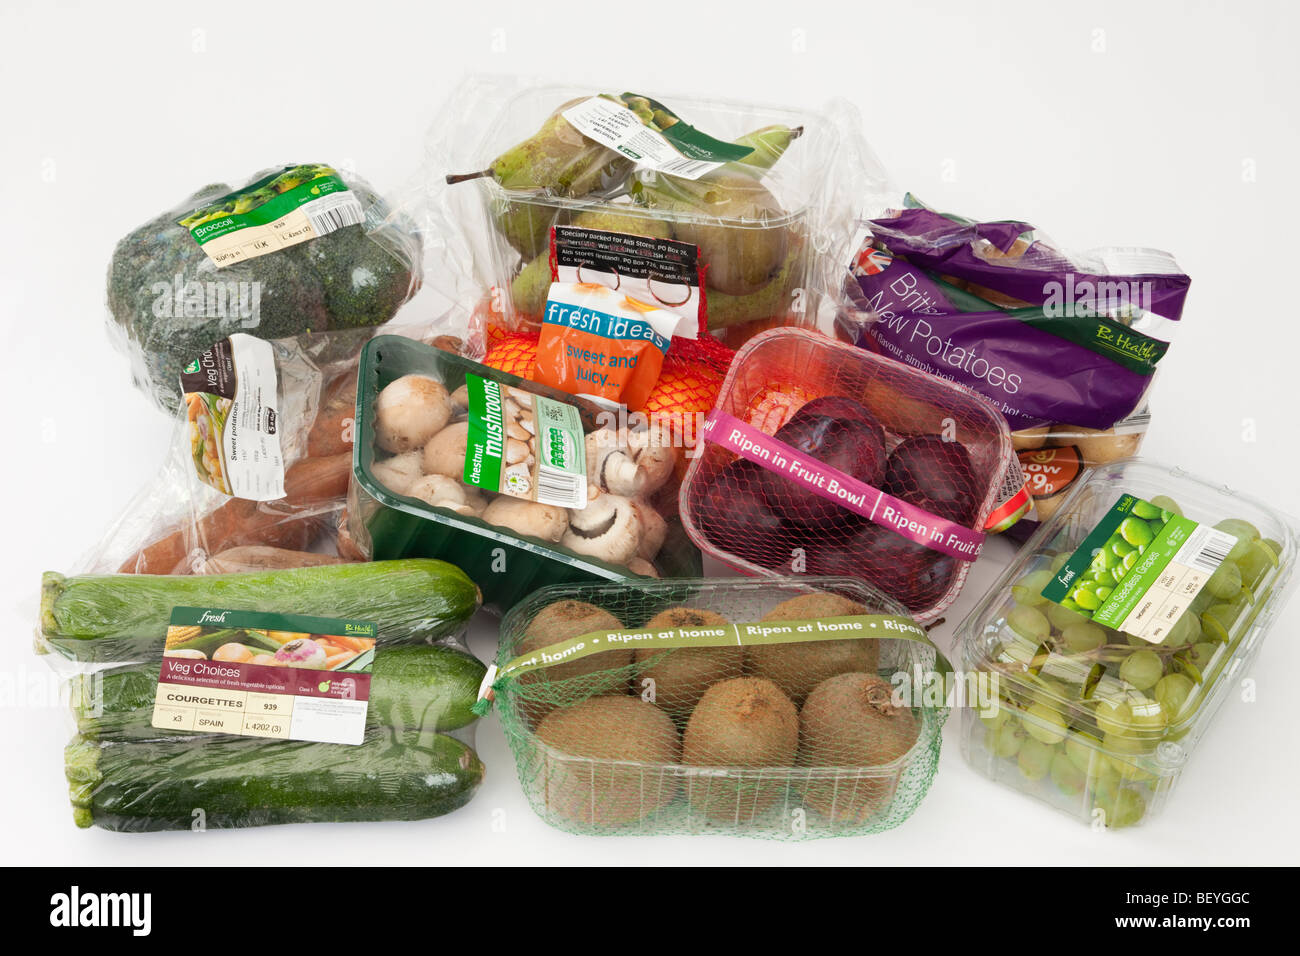 Selection of fruit and vegetables in packaged single-use plastic packaging from a supermarket. England UK Britain Stock Photo